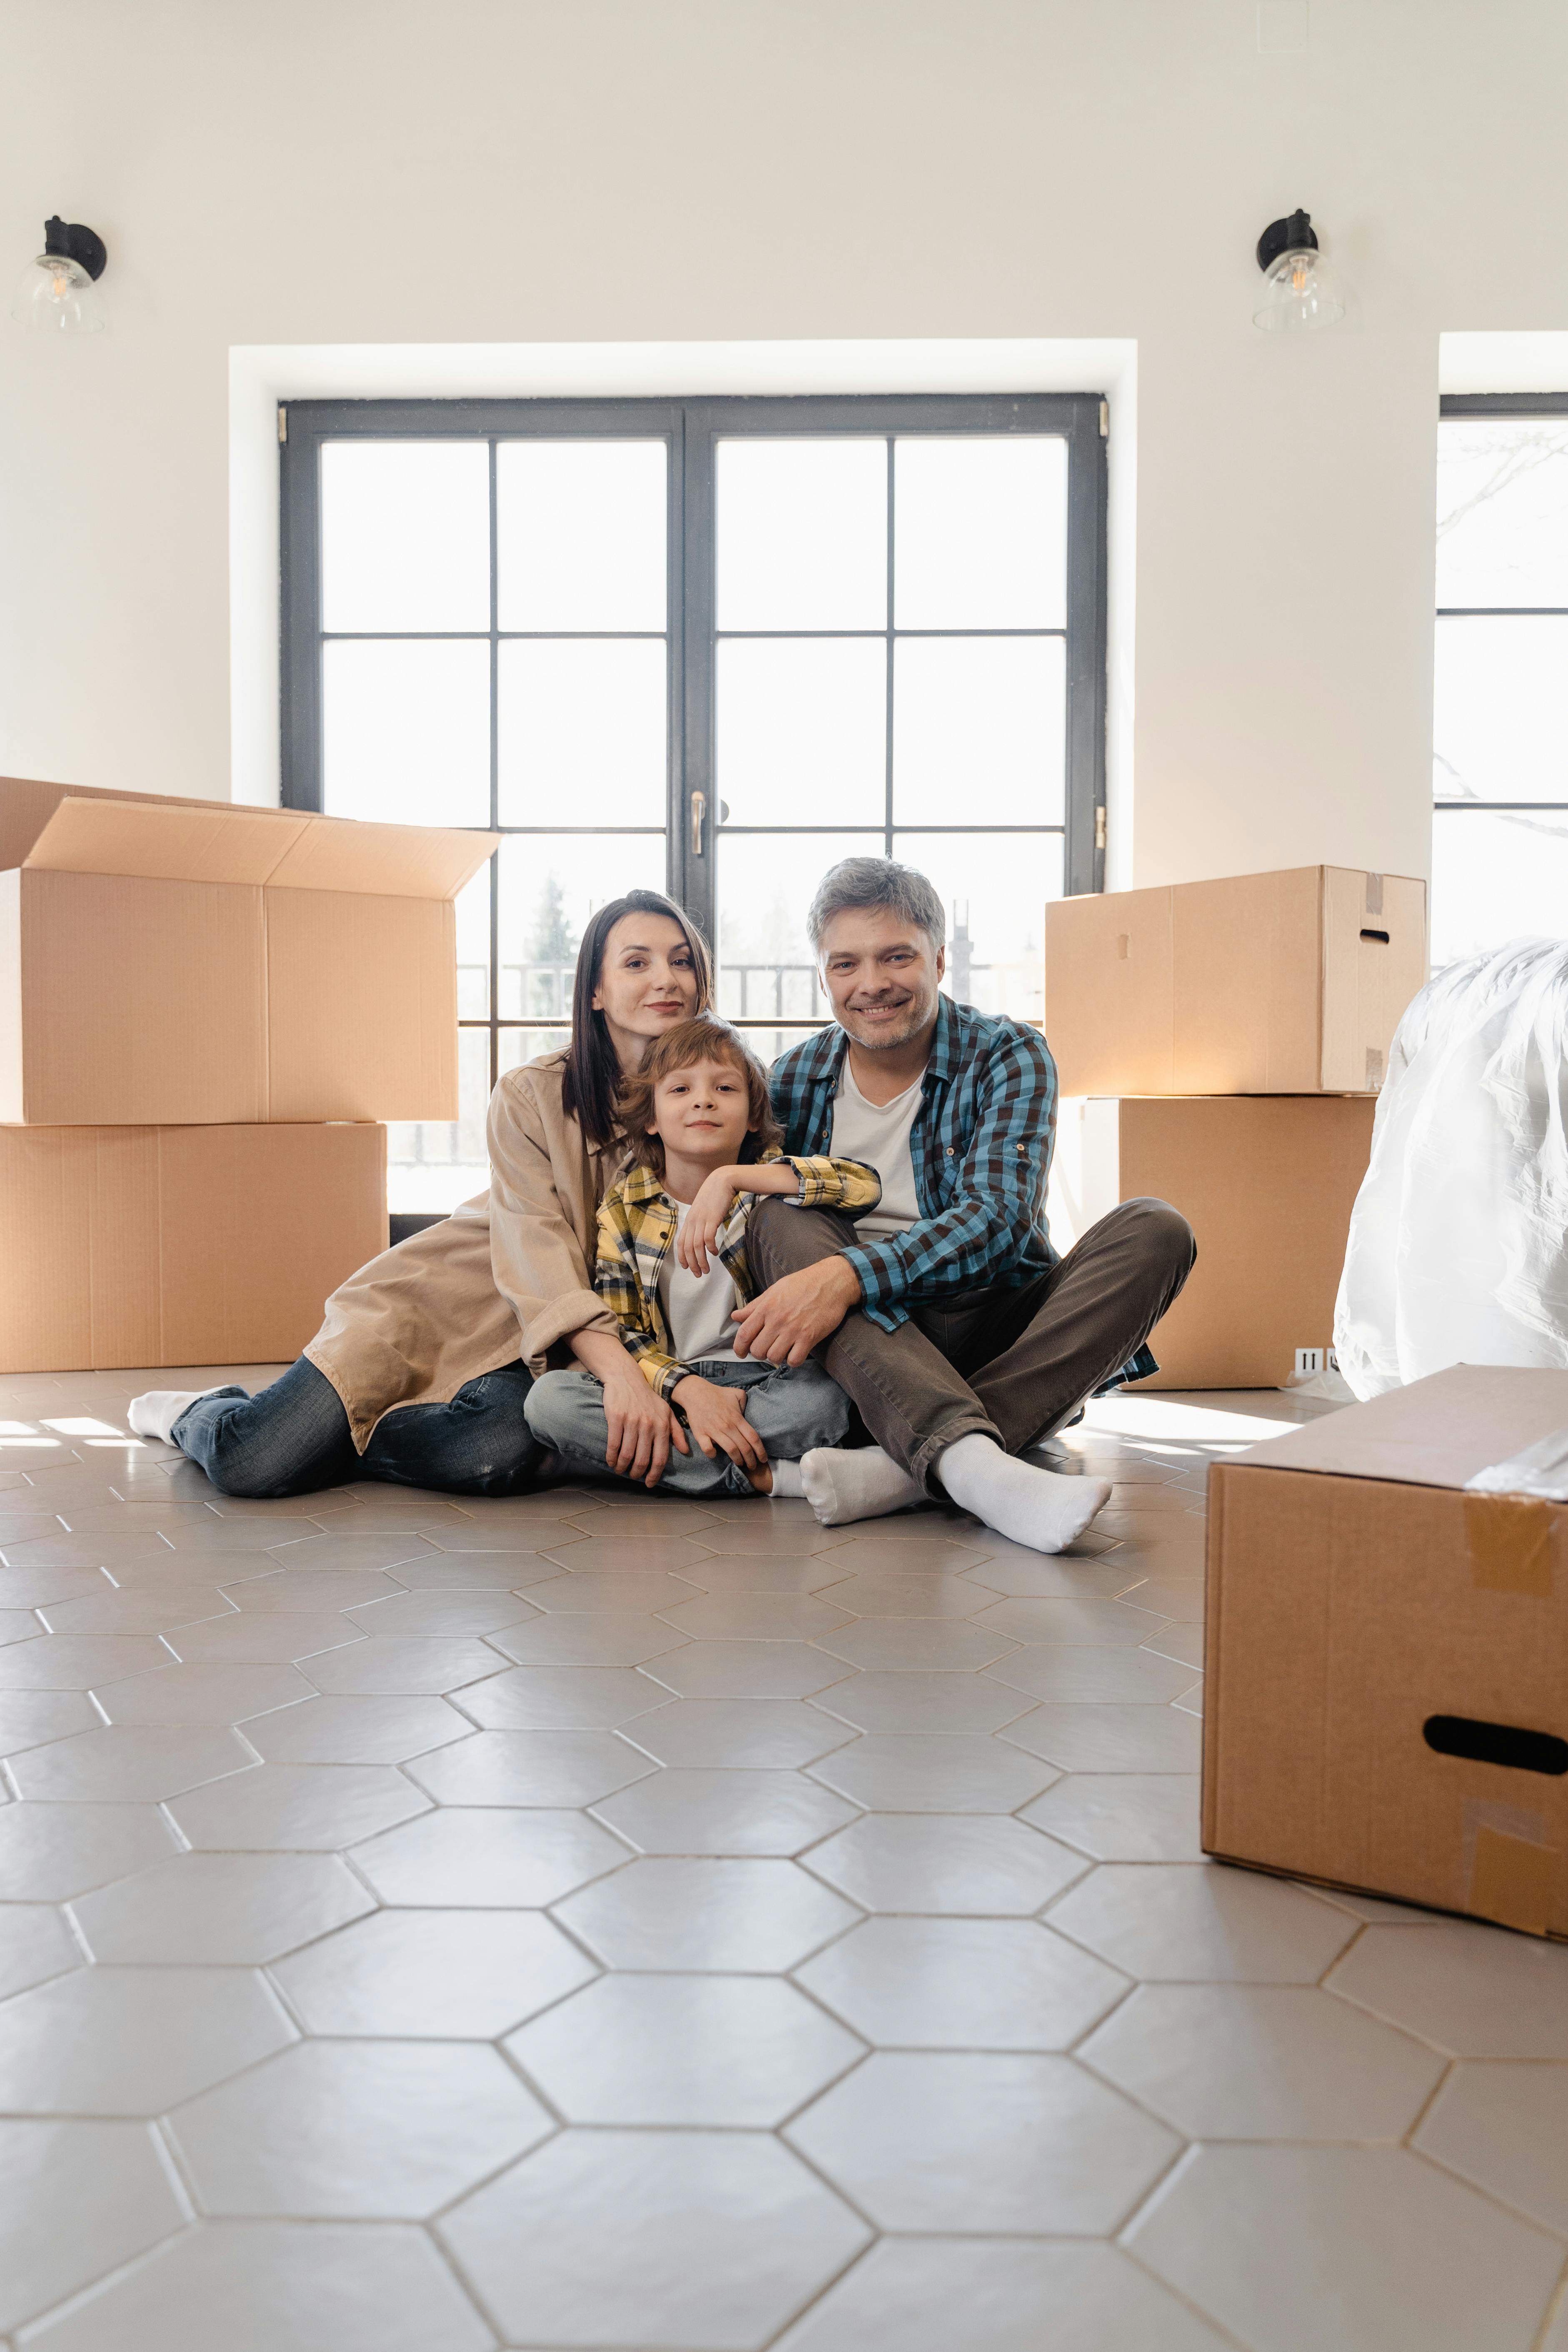 A family of three seated on the living room floor with boxes around them | Source: Pexels